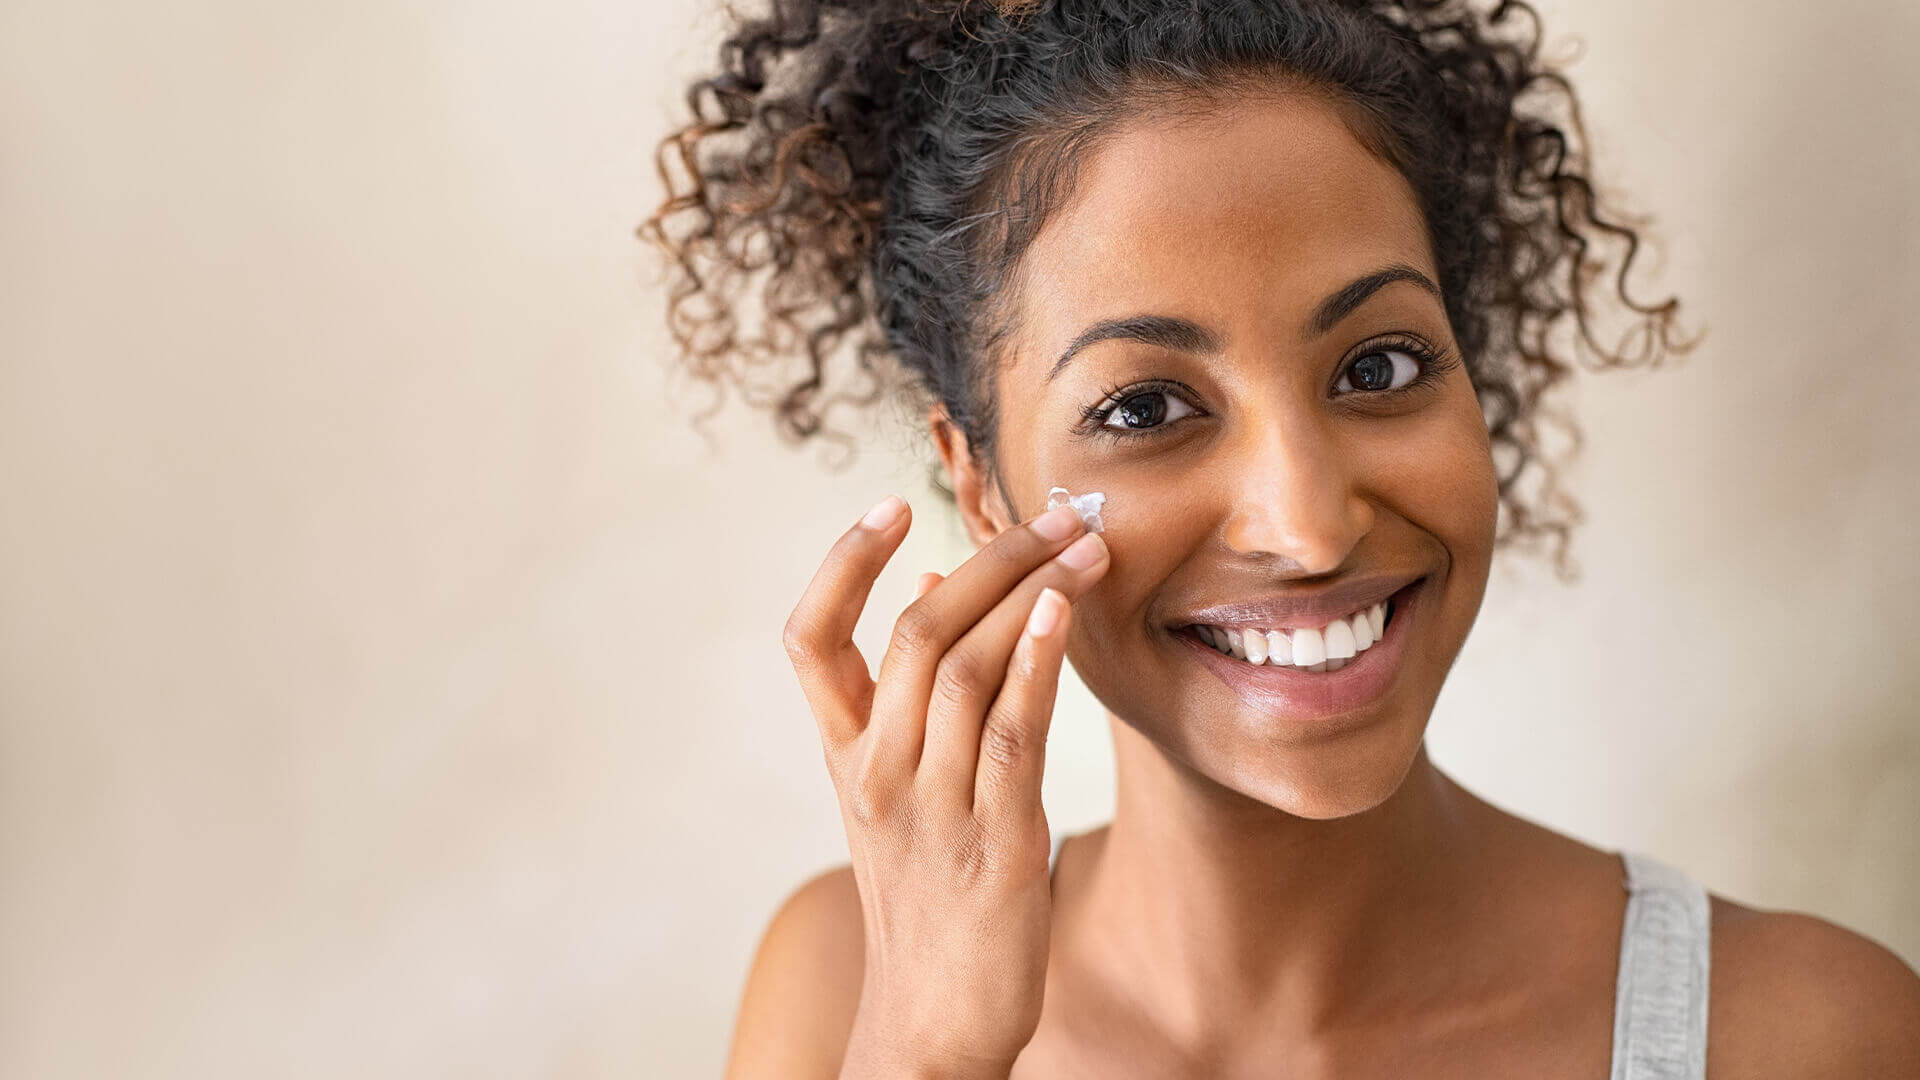 Discover how to create a personalized skincare routine that addresses your unique skin concerns. Learn tips for choosing the right products and optimizing your routine for maximum results